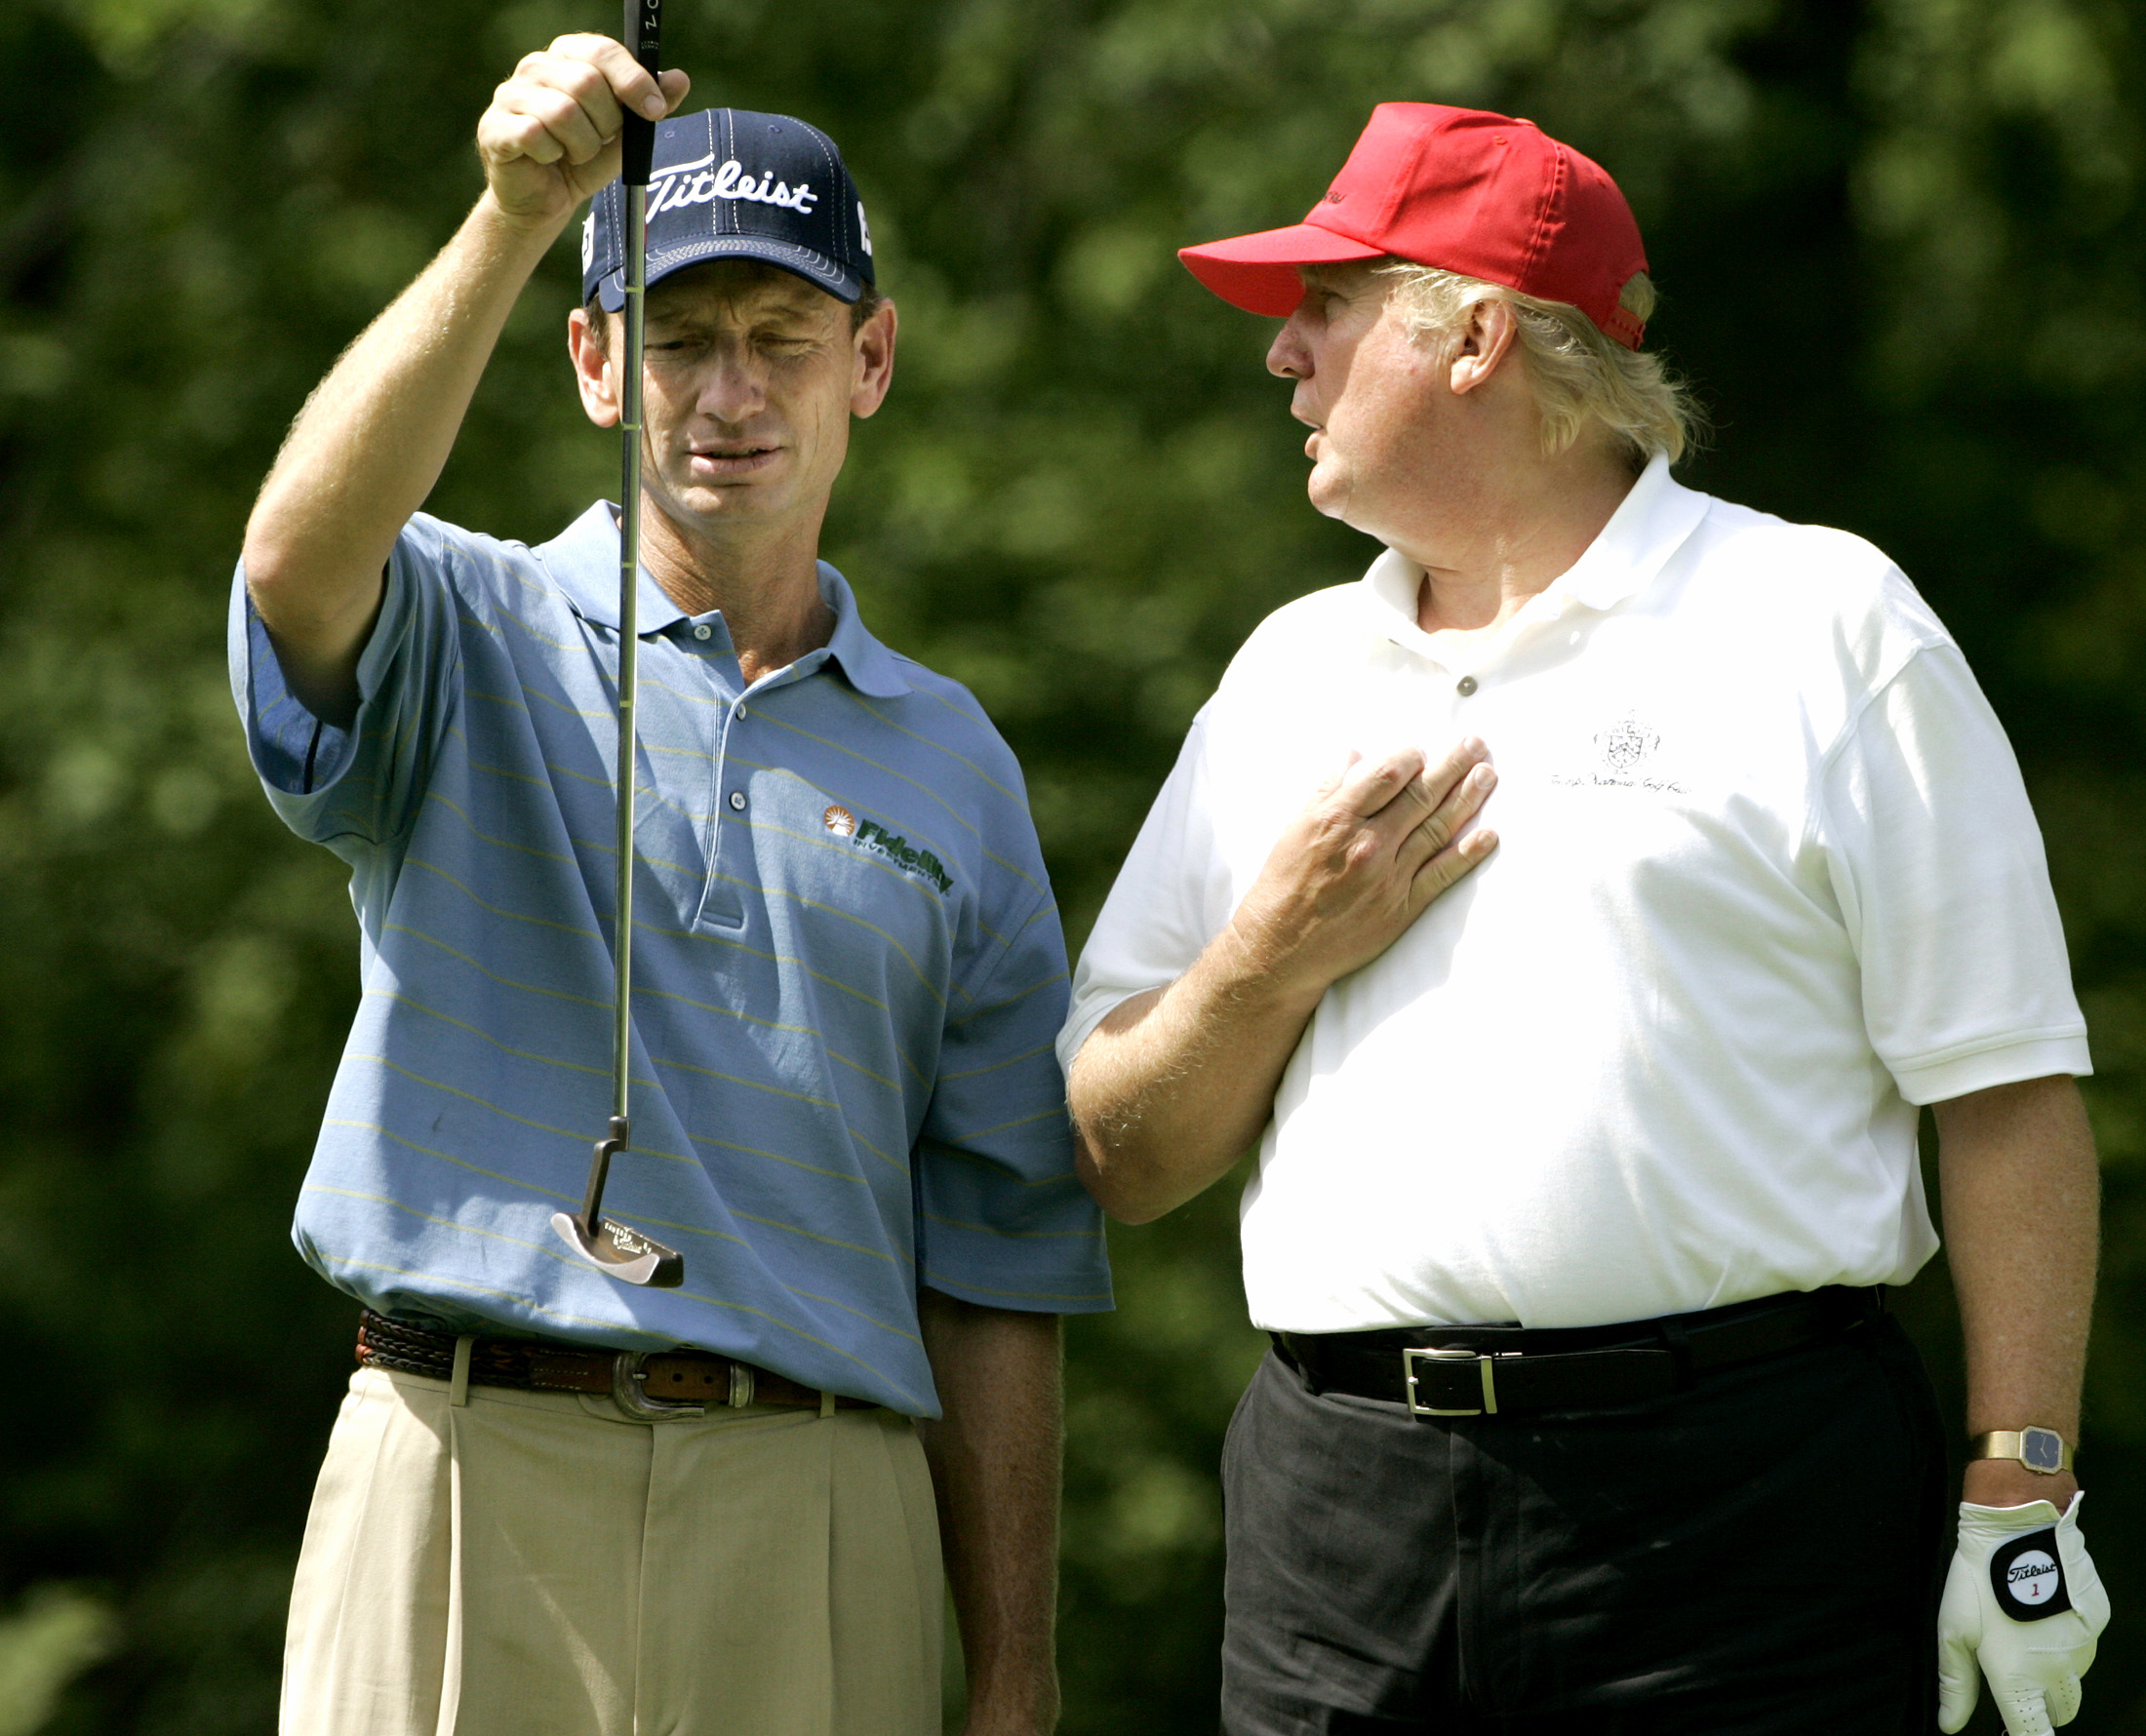 PHOTO: Brad Faxon, left, lines up a putt while listening to Donald Trump, right, on the fifth green during a Pro-Am round at the Deutsche Bank Championship golf tournament at the TPC of Boston in Norton, Mass., Thursday Aug. 31, 2006.